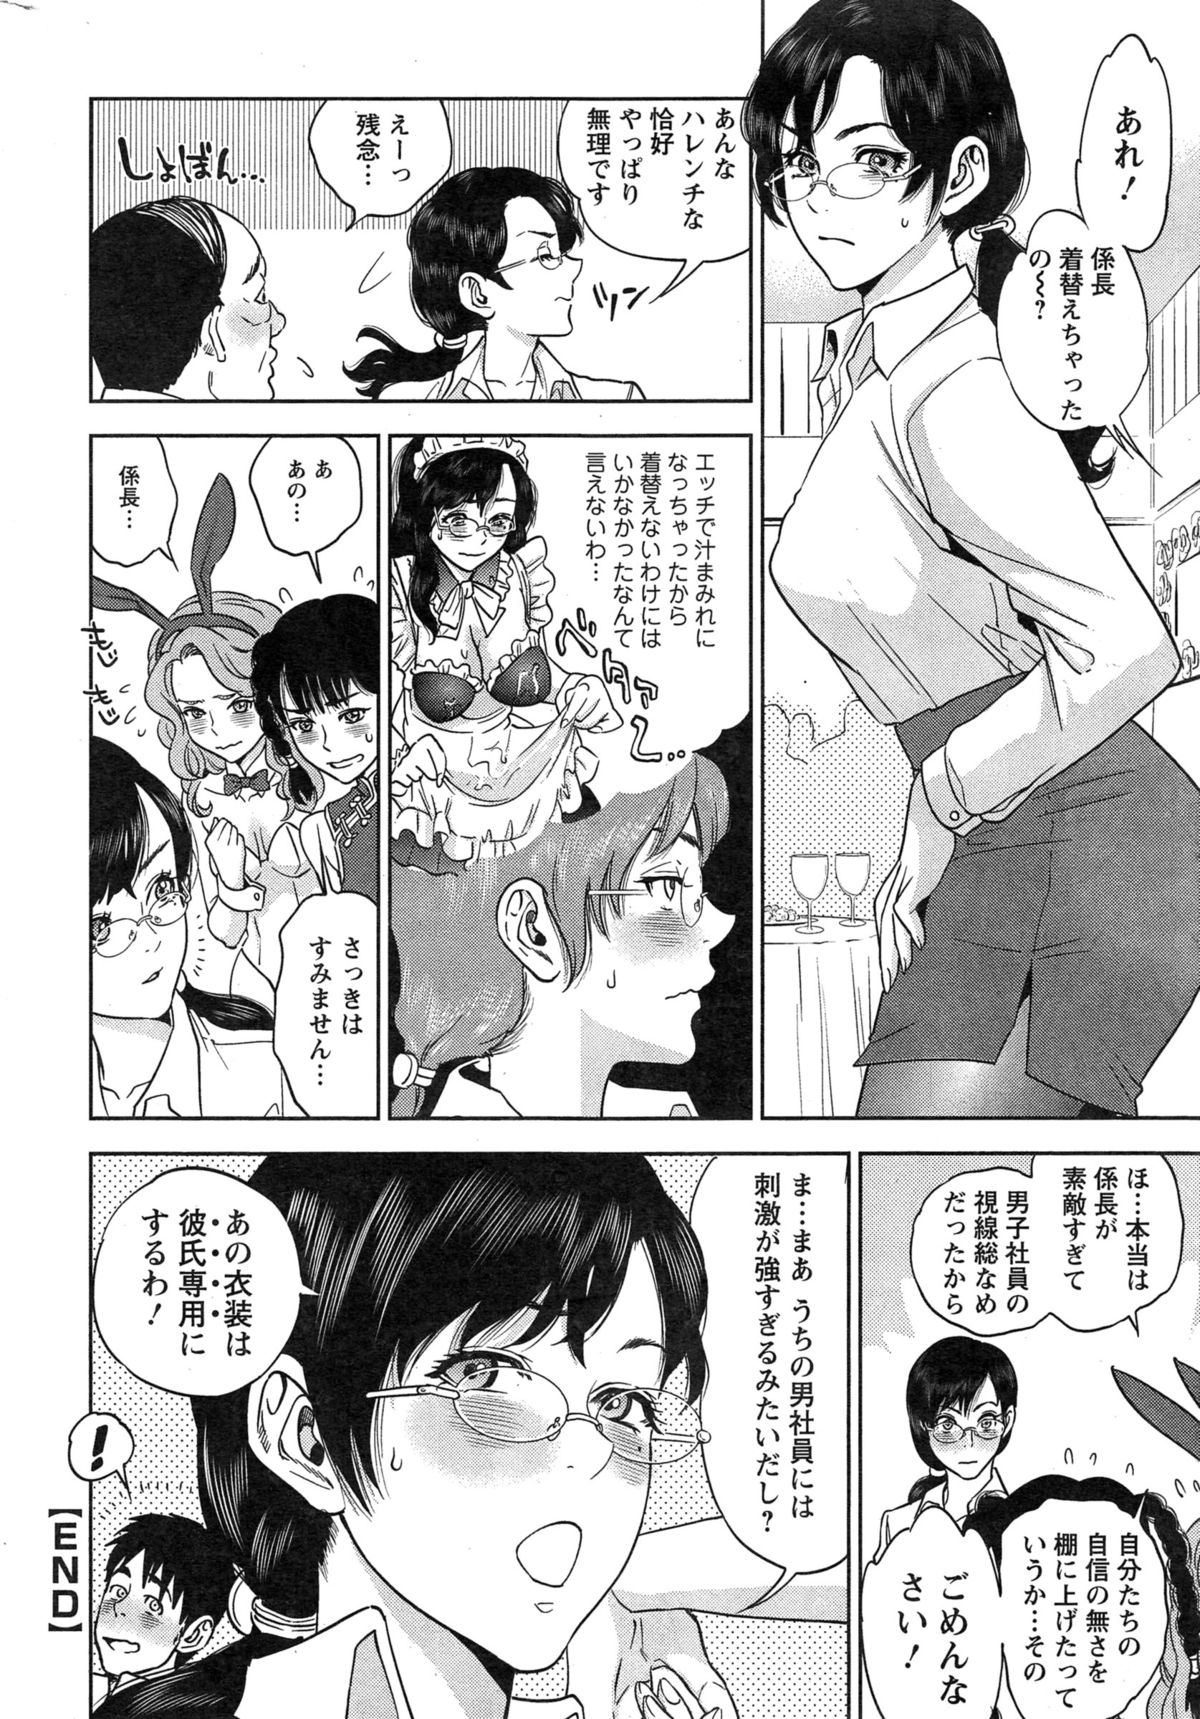 Action Pizazz Cgumi 2015-02 page 26 full